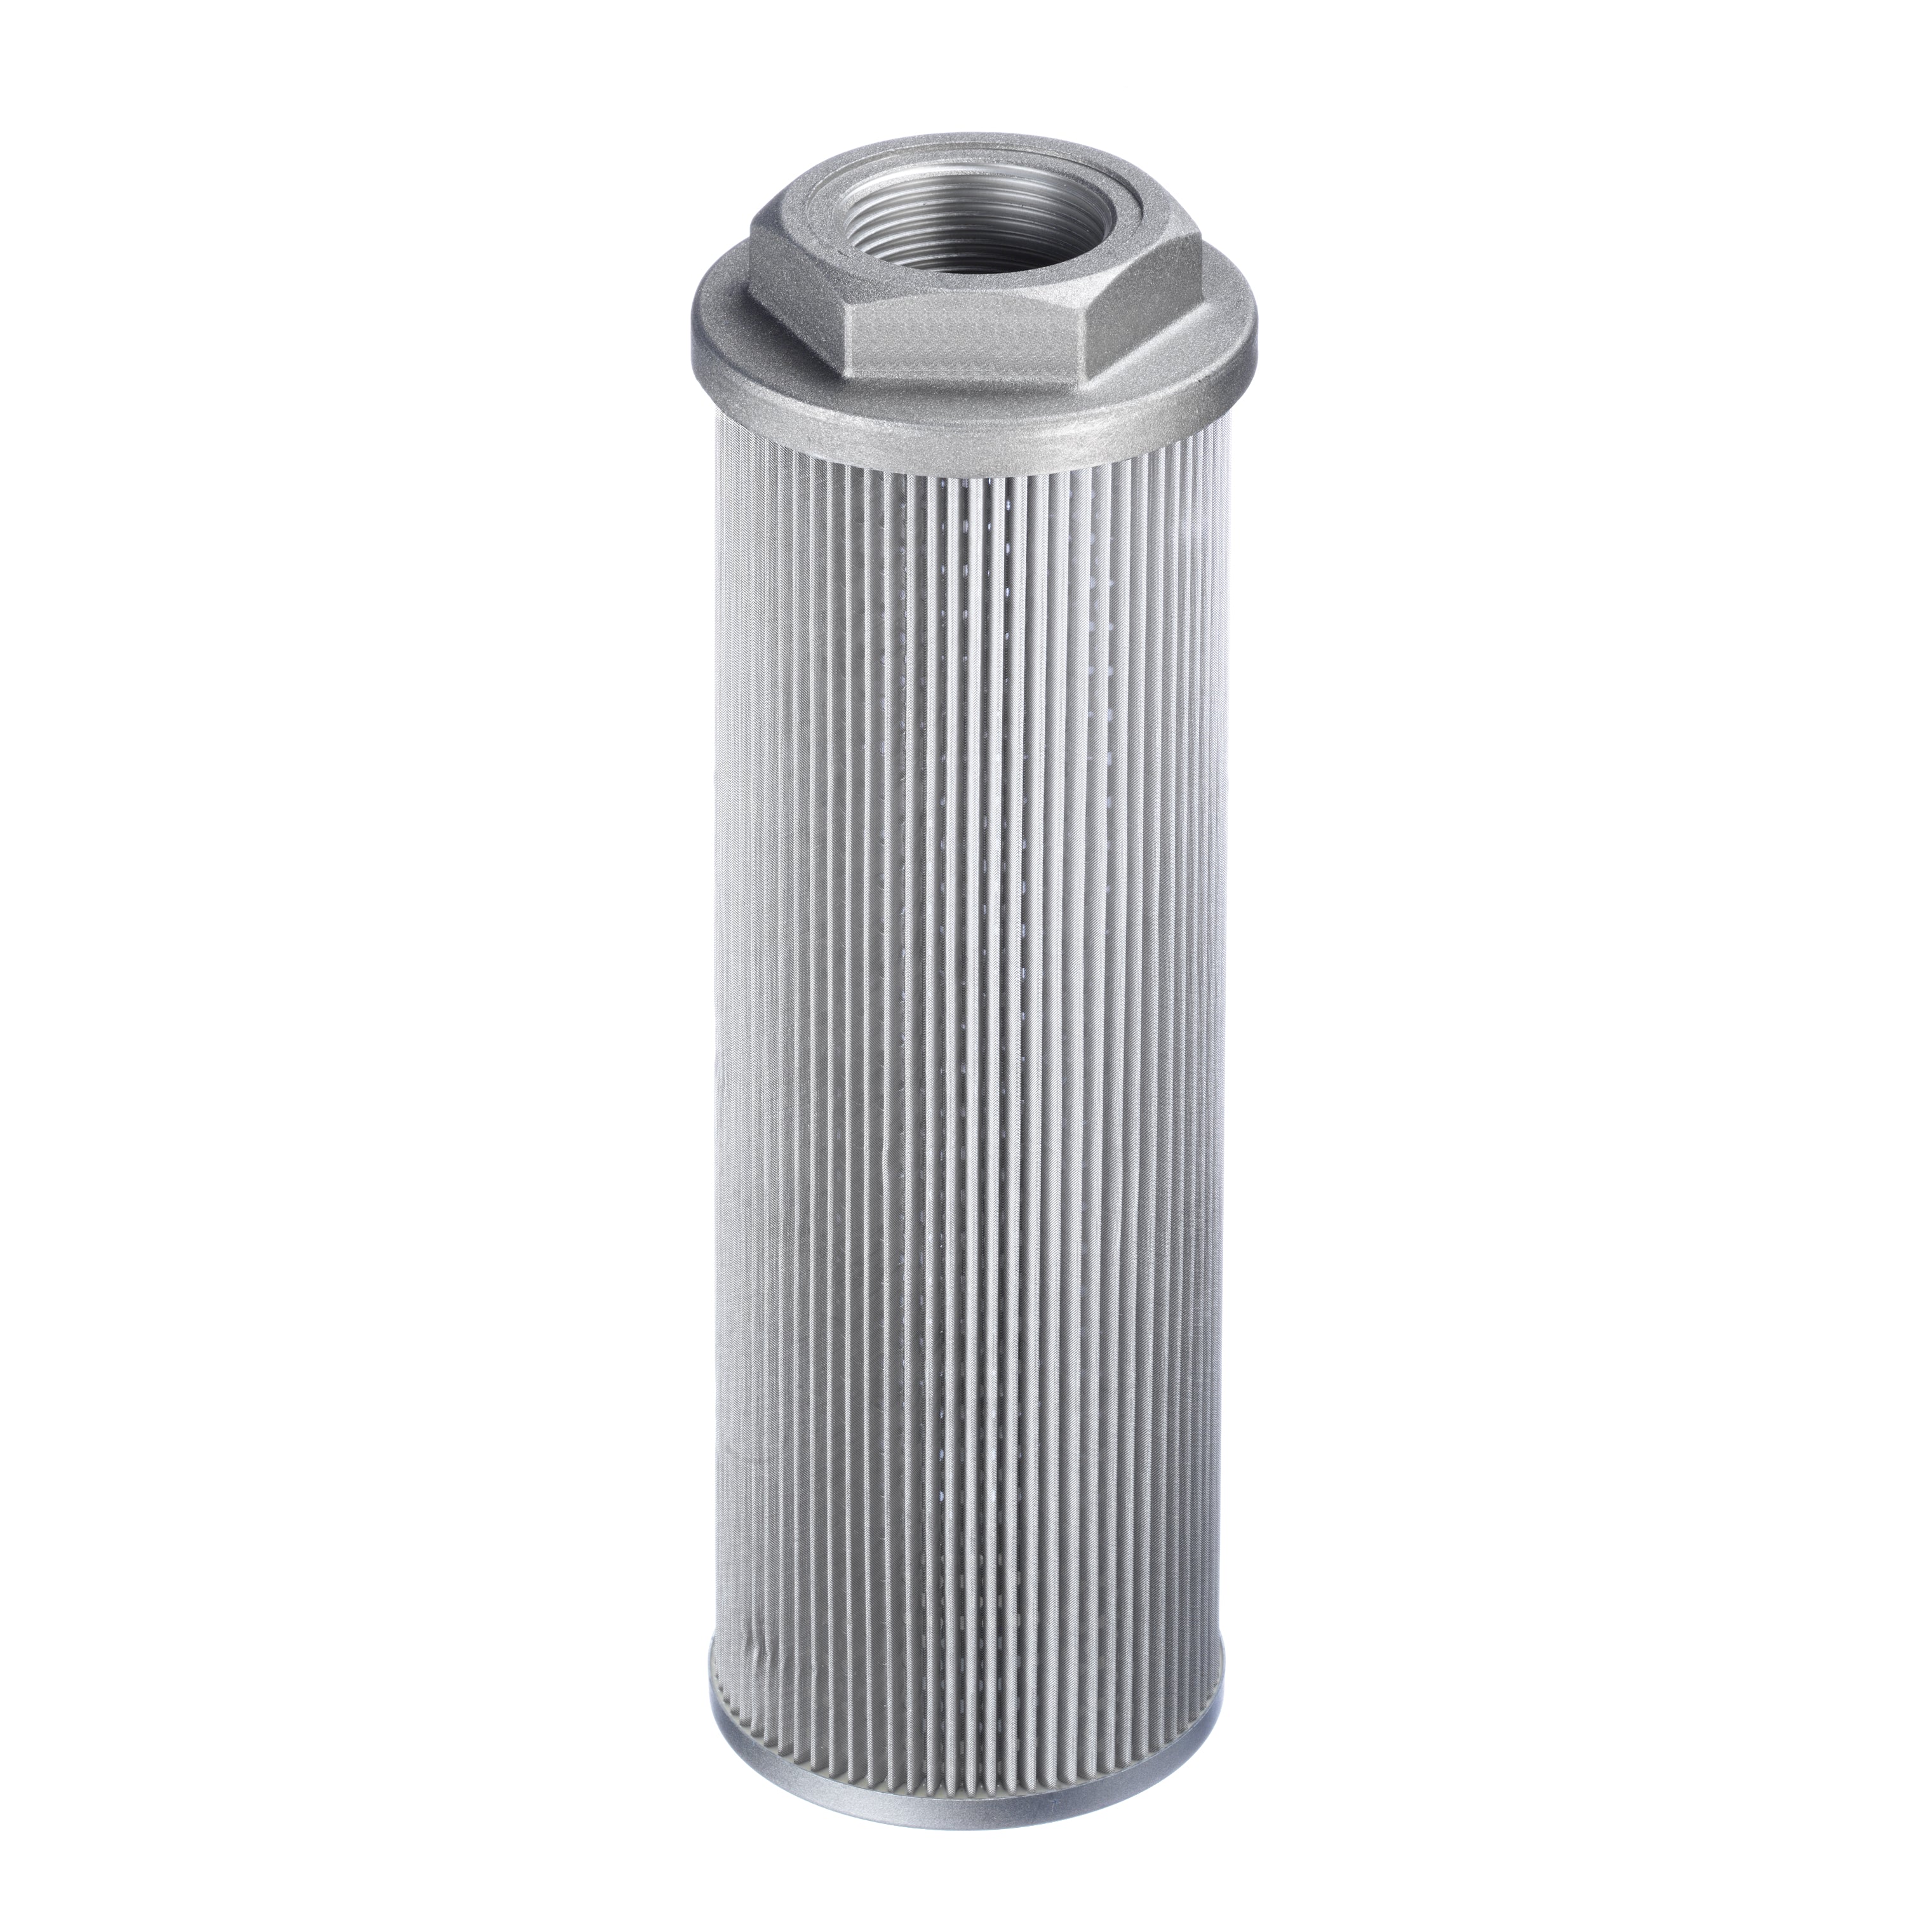 SUS-068-N16-140-125-A-B0.2 : Stauff Suction Strainer, Aluminum End Cap, 1" NPT, 13GPM, 125 Micron, 3psi Bypass